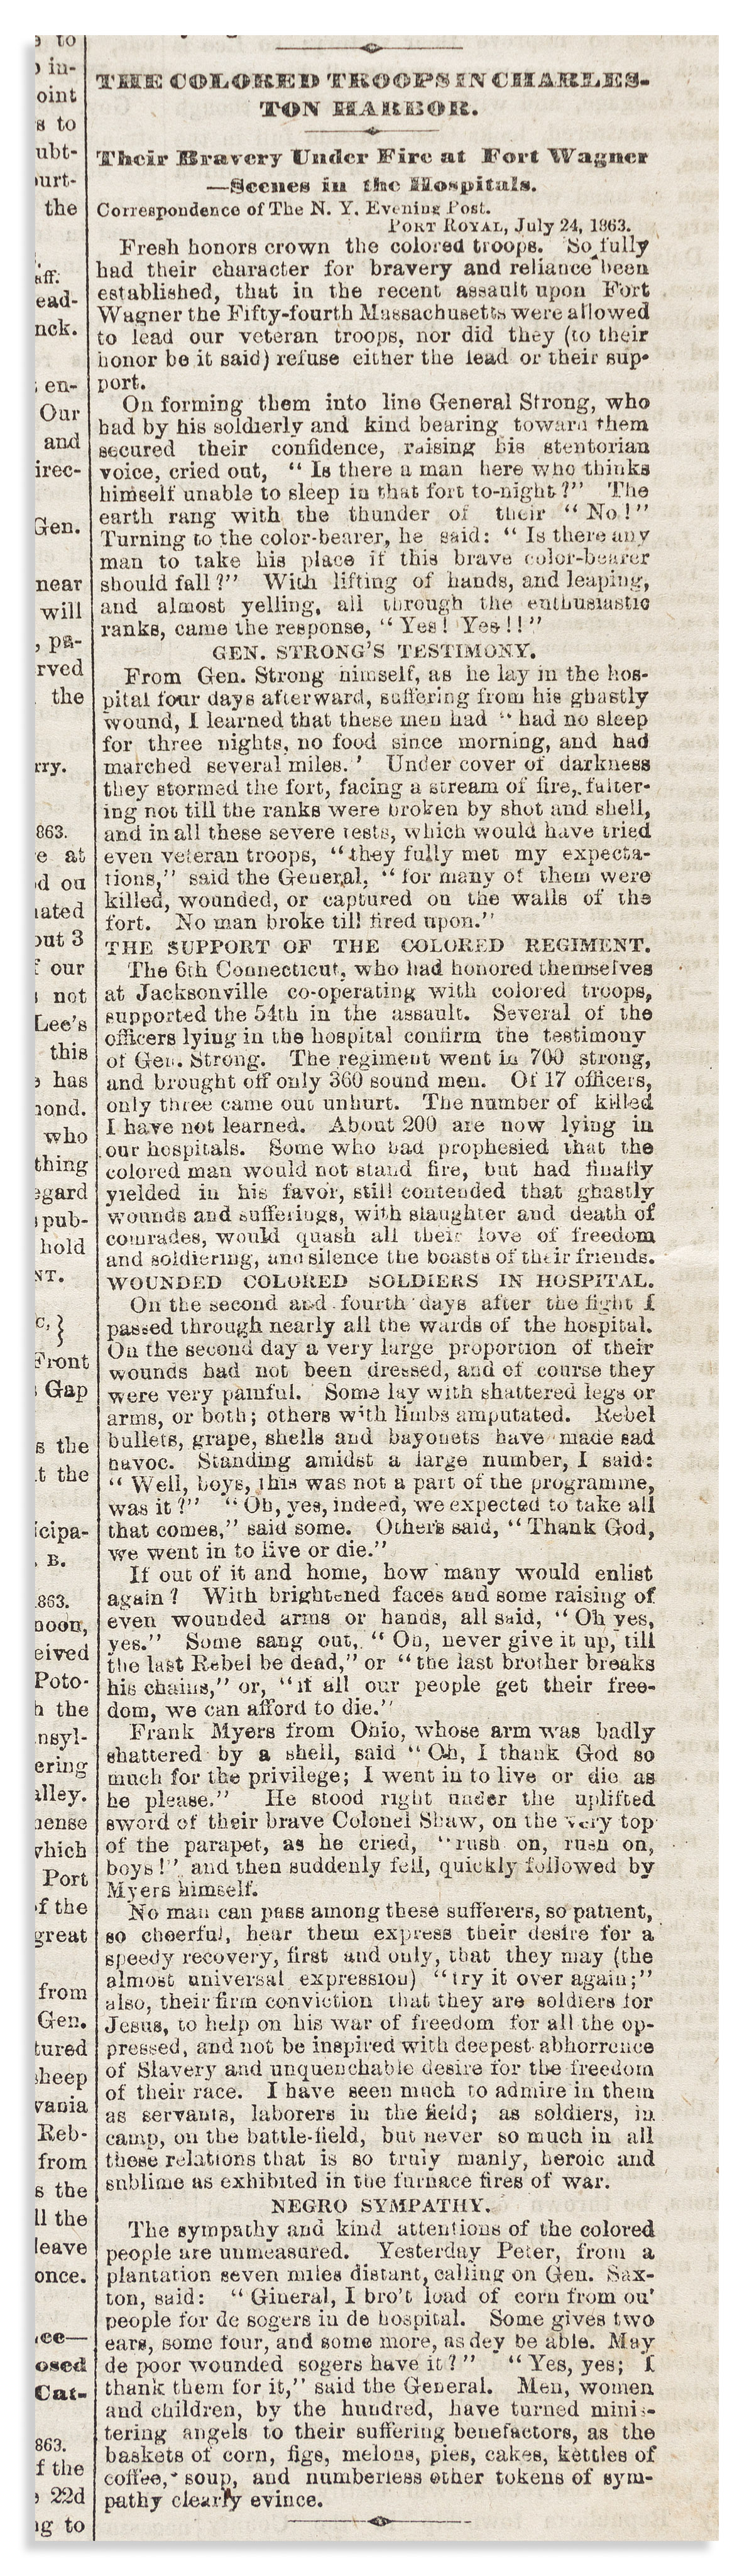 (CIVIL WAR--COLORED TROOPS.) Report on the Battle of Fort Wagner in the New-York Tribune.